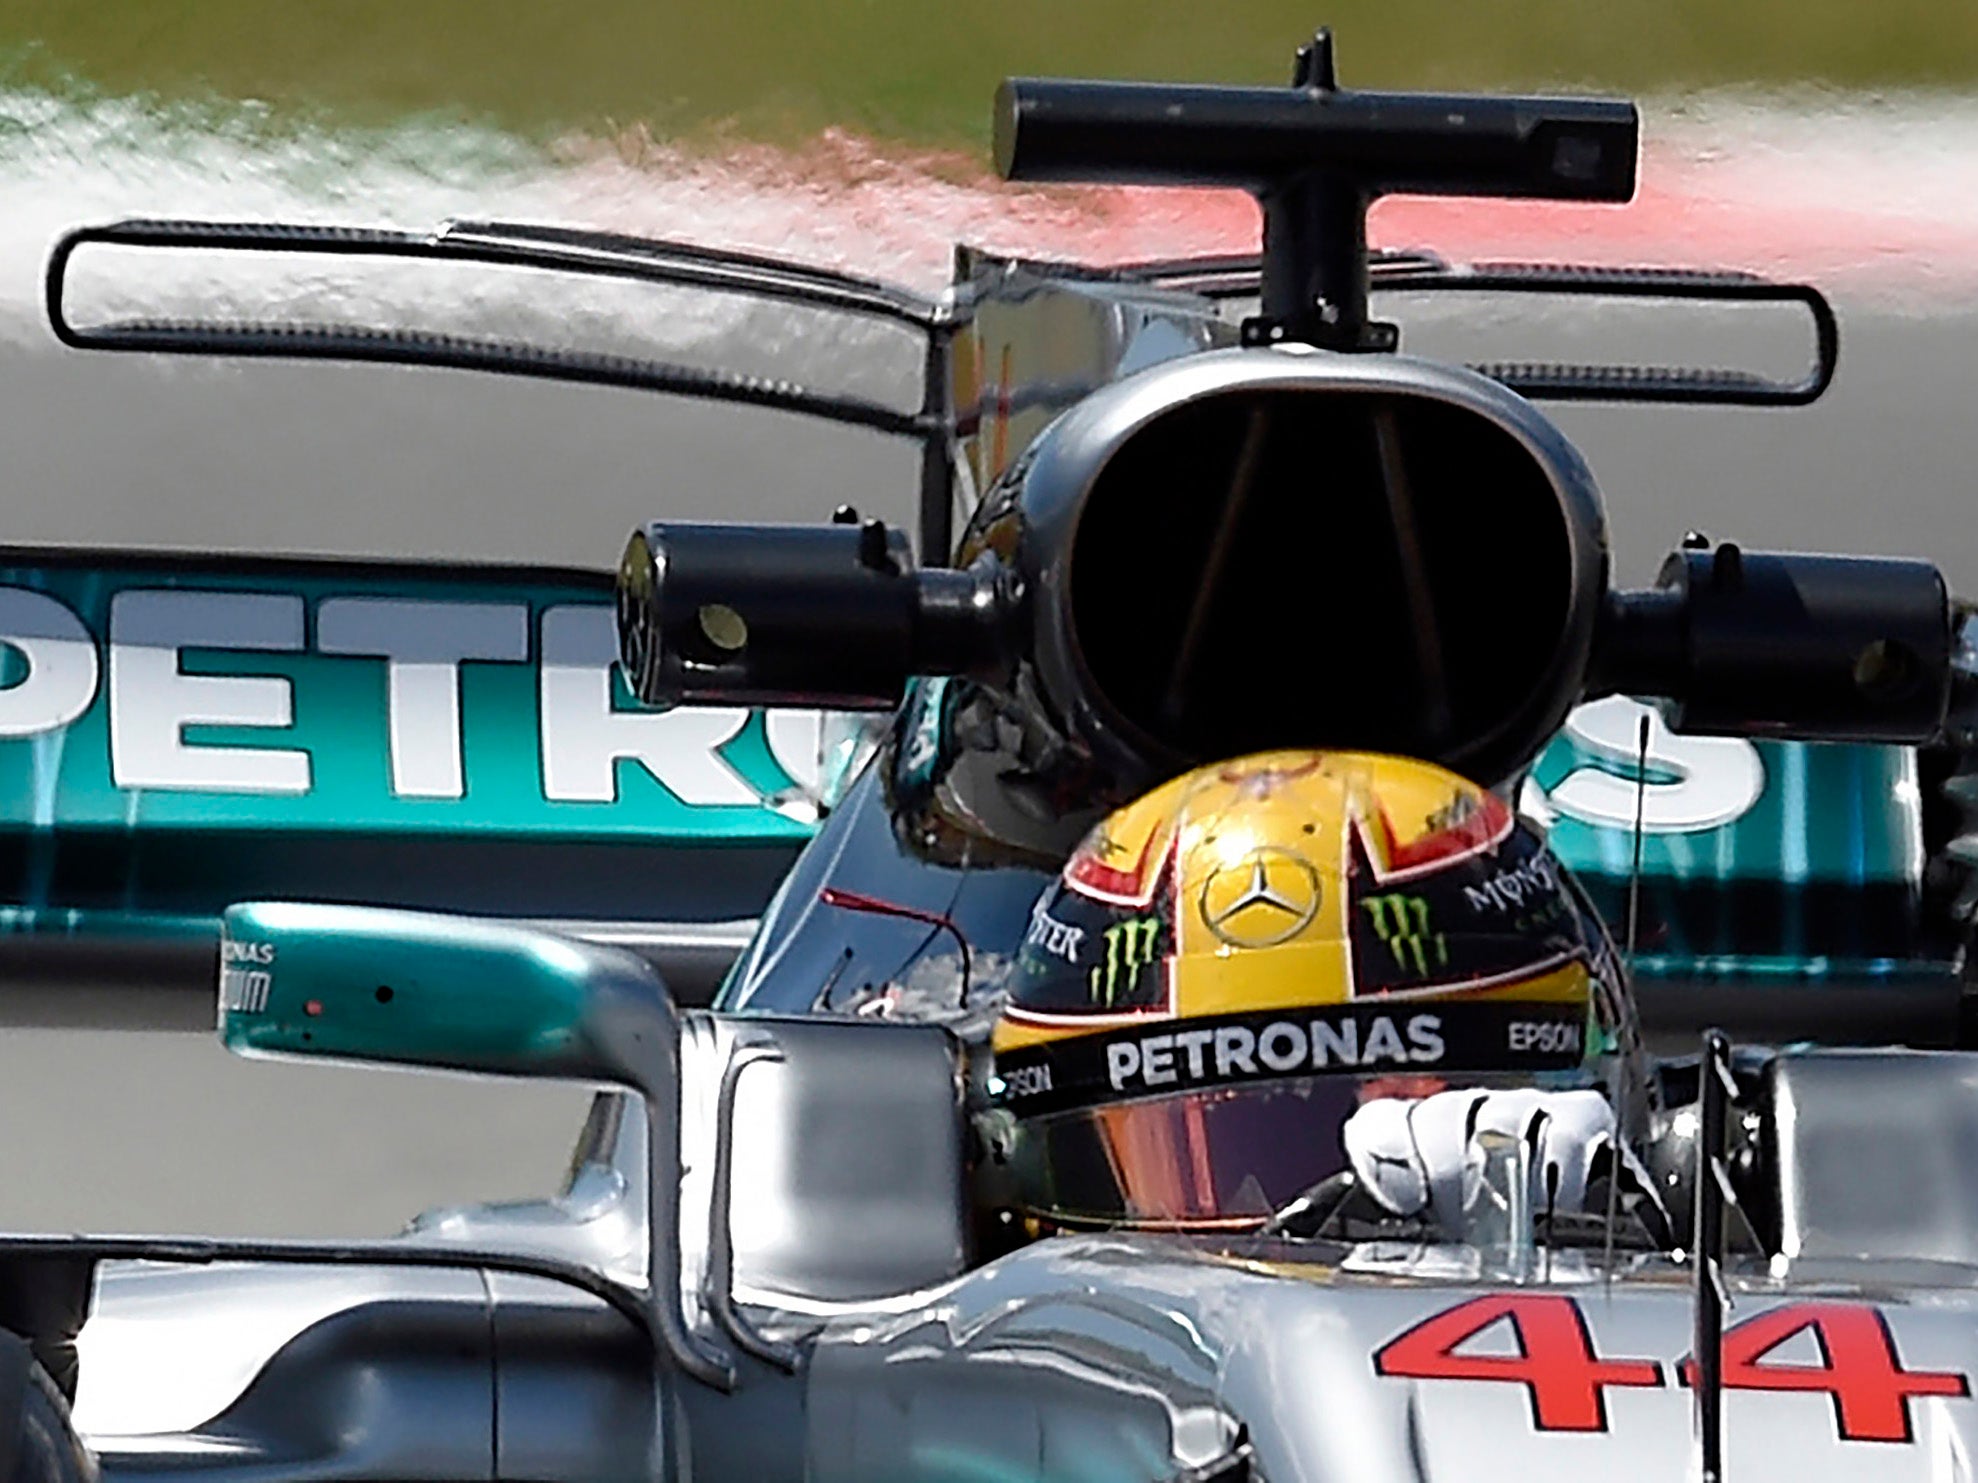 Hamilton said the wind made the driving conditions more difficult